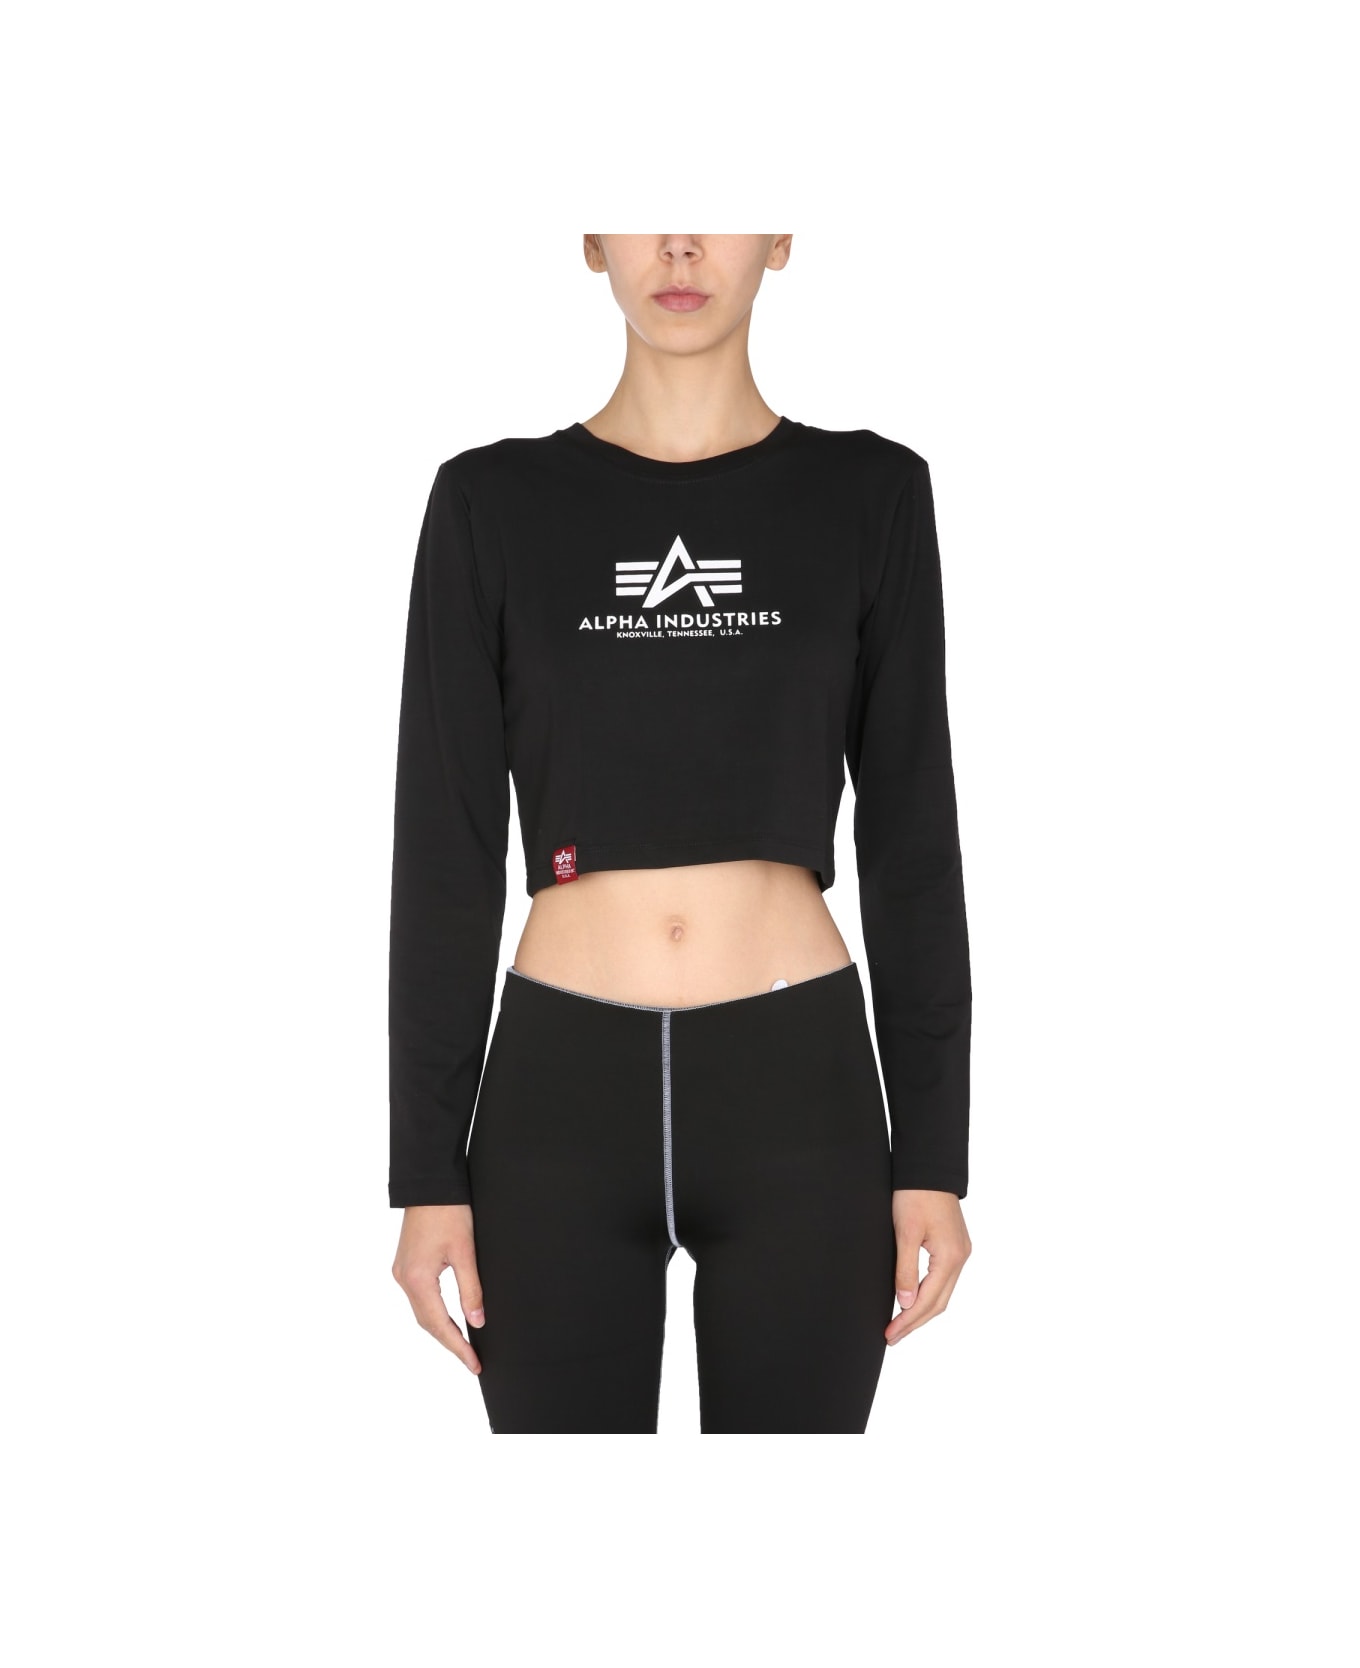 Alpha Industries Cropped Fit T-shirt - BLACK